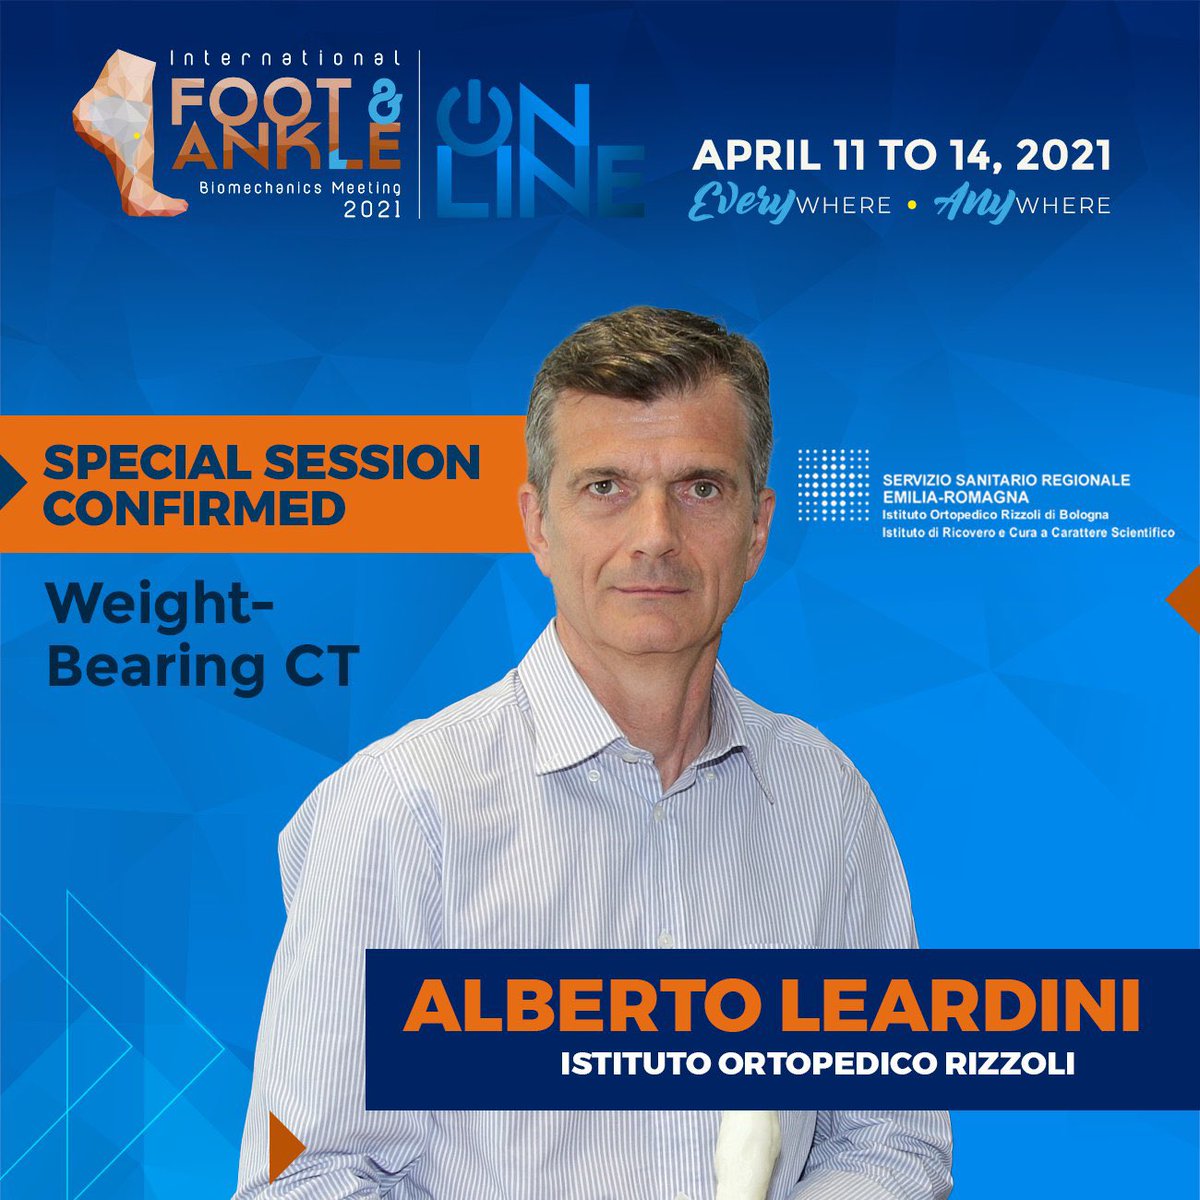 Tomorrow is an exciting day! @Dr_deCesarNetto will headline #iFAB2021 as keynote speaker, and @DrLintzFoot will be co-chairing a special #WBCT session. There’s still time to register - more information on i-fab2021.com